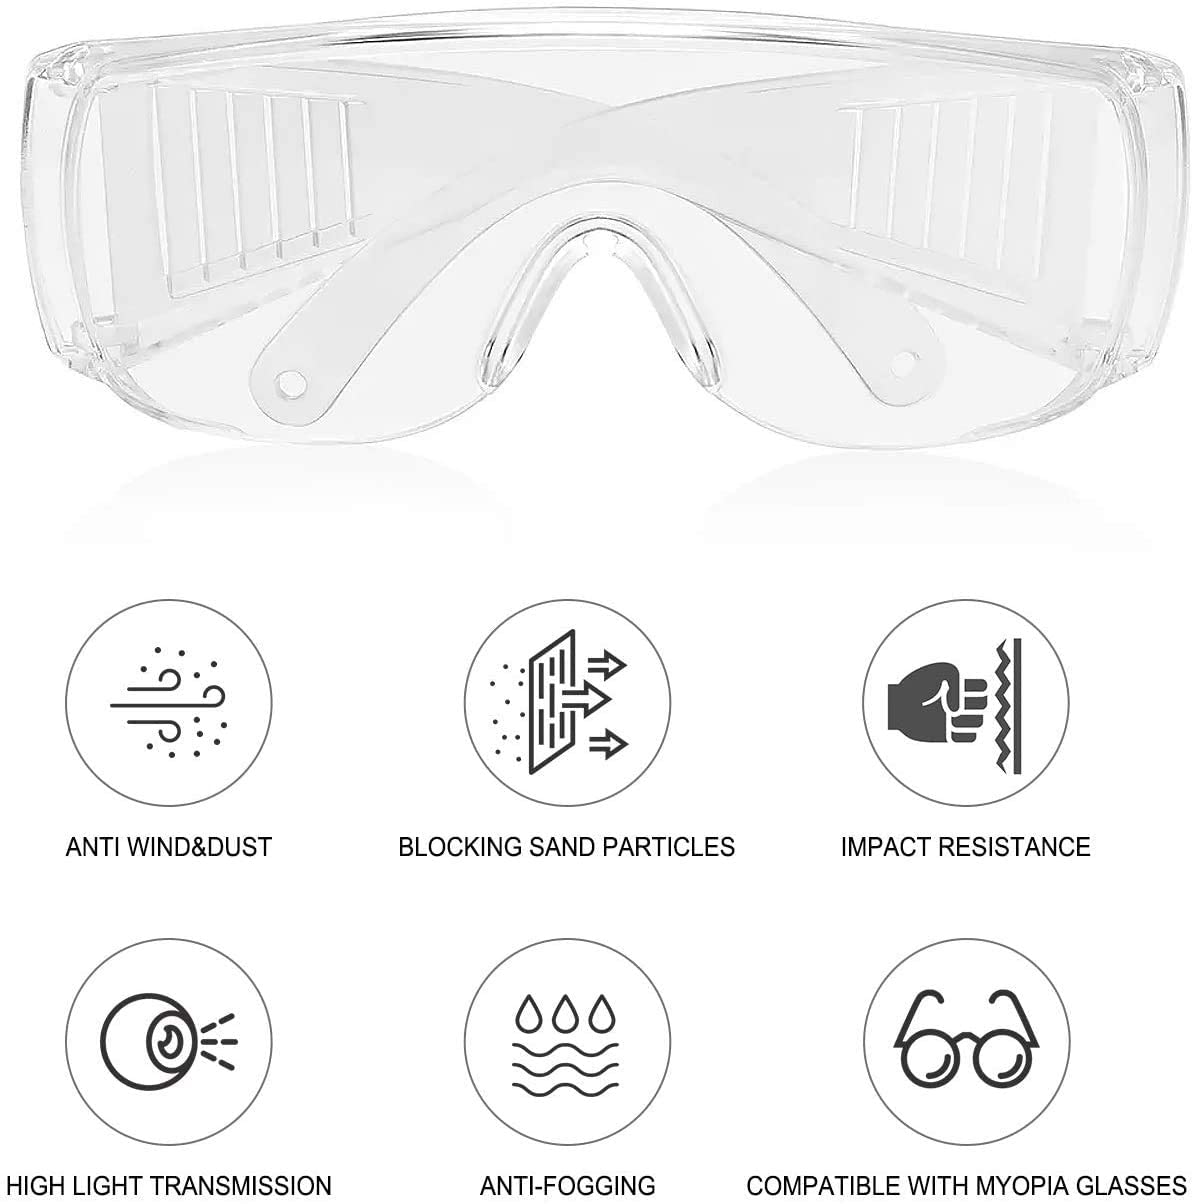 Alrisco Protective Eyewear Safety Goggles Clear Anti-fog Anti-Scratch Safety Glasses over Prescription Glasses, Transparent Frame Light Weight and Comfortable - image 5 of 7